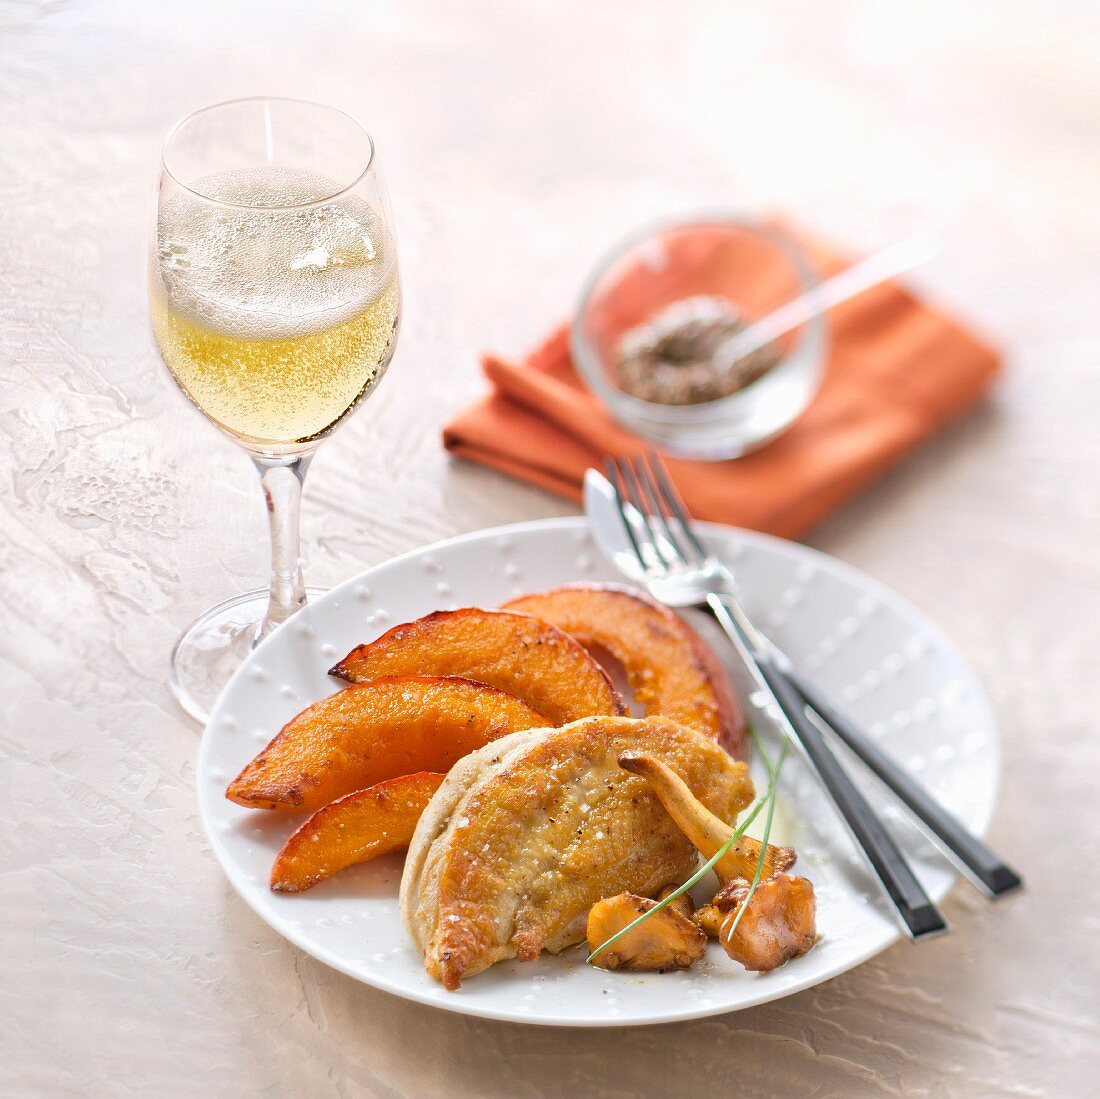 Roasted chicken breast with chanterelles and grilled pumpkin, glass of Crémant